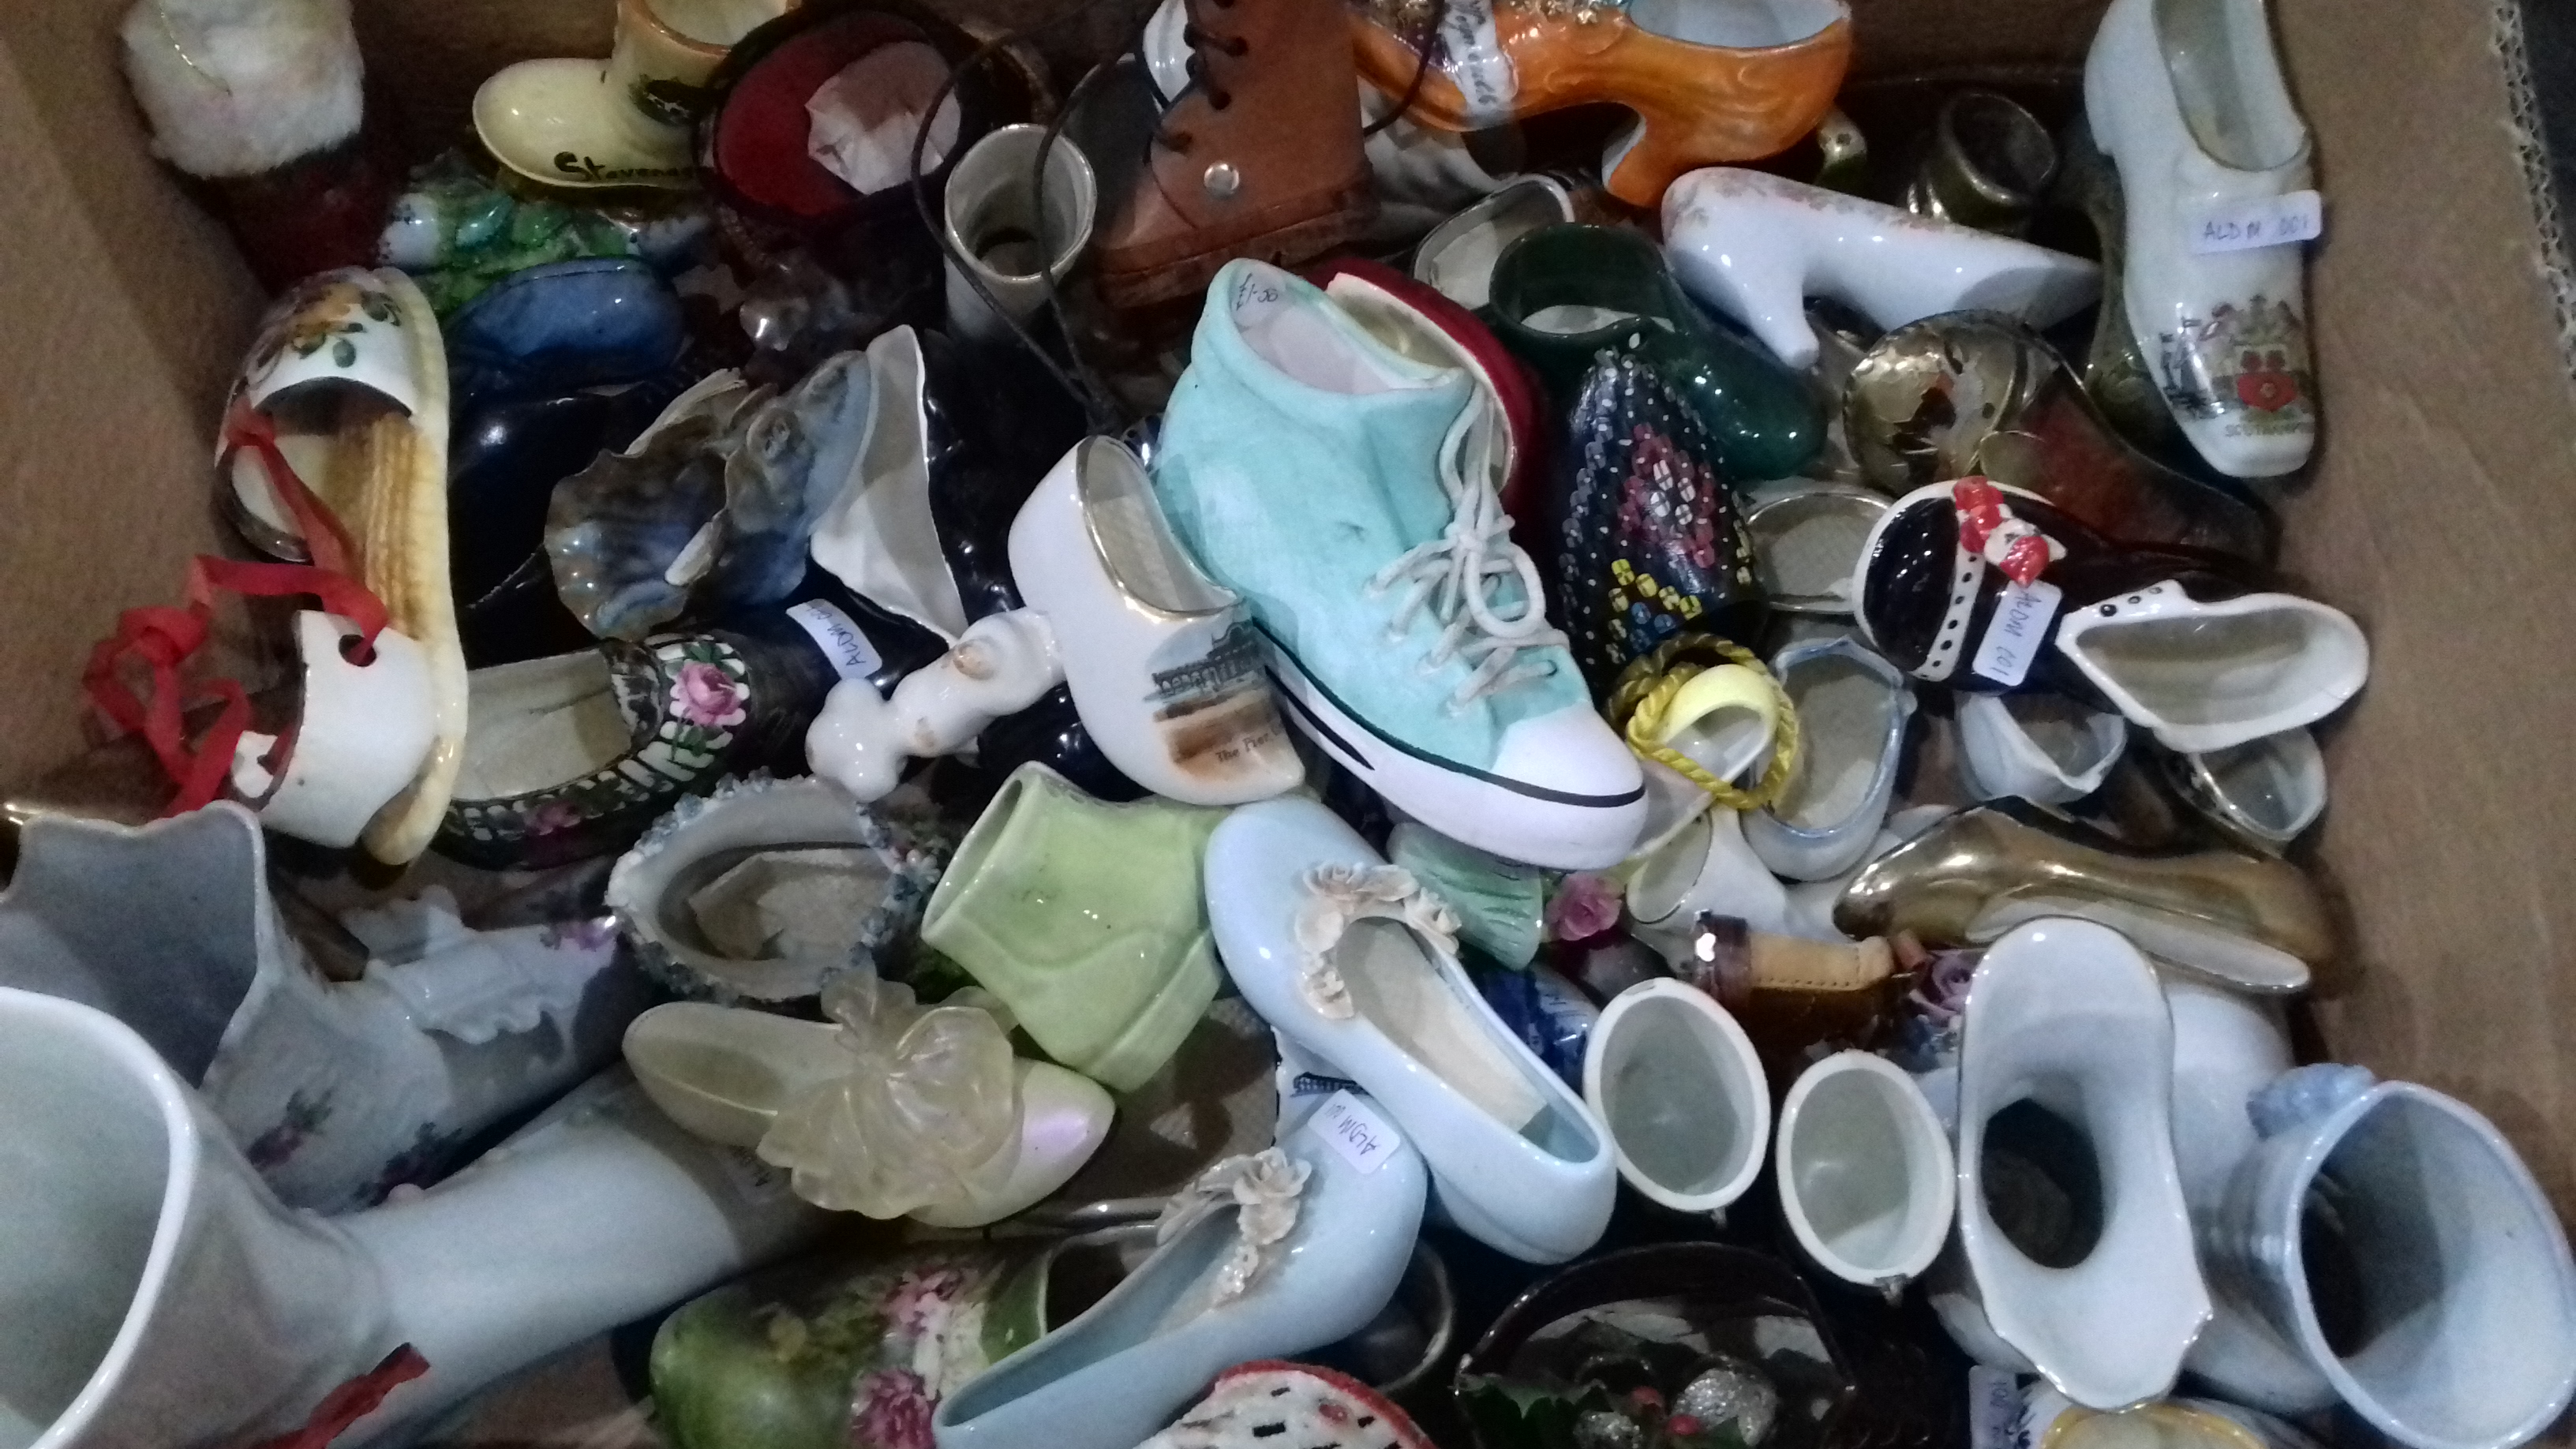 Large collection of ceramic shoes